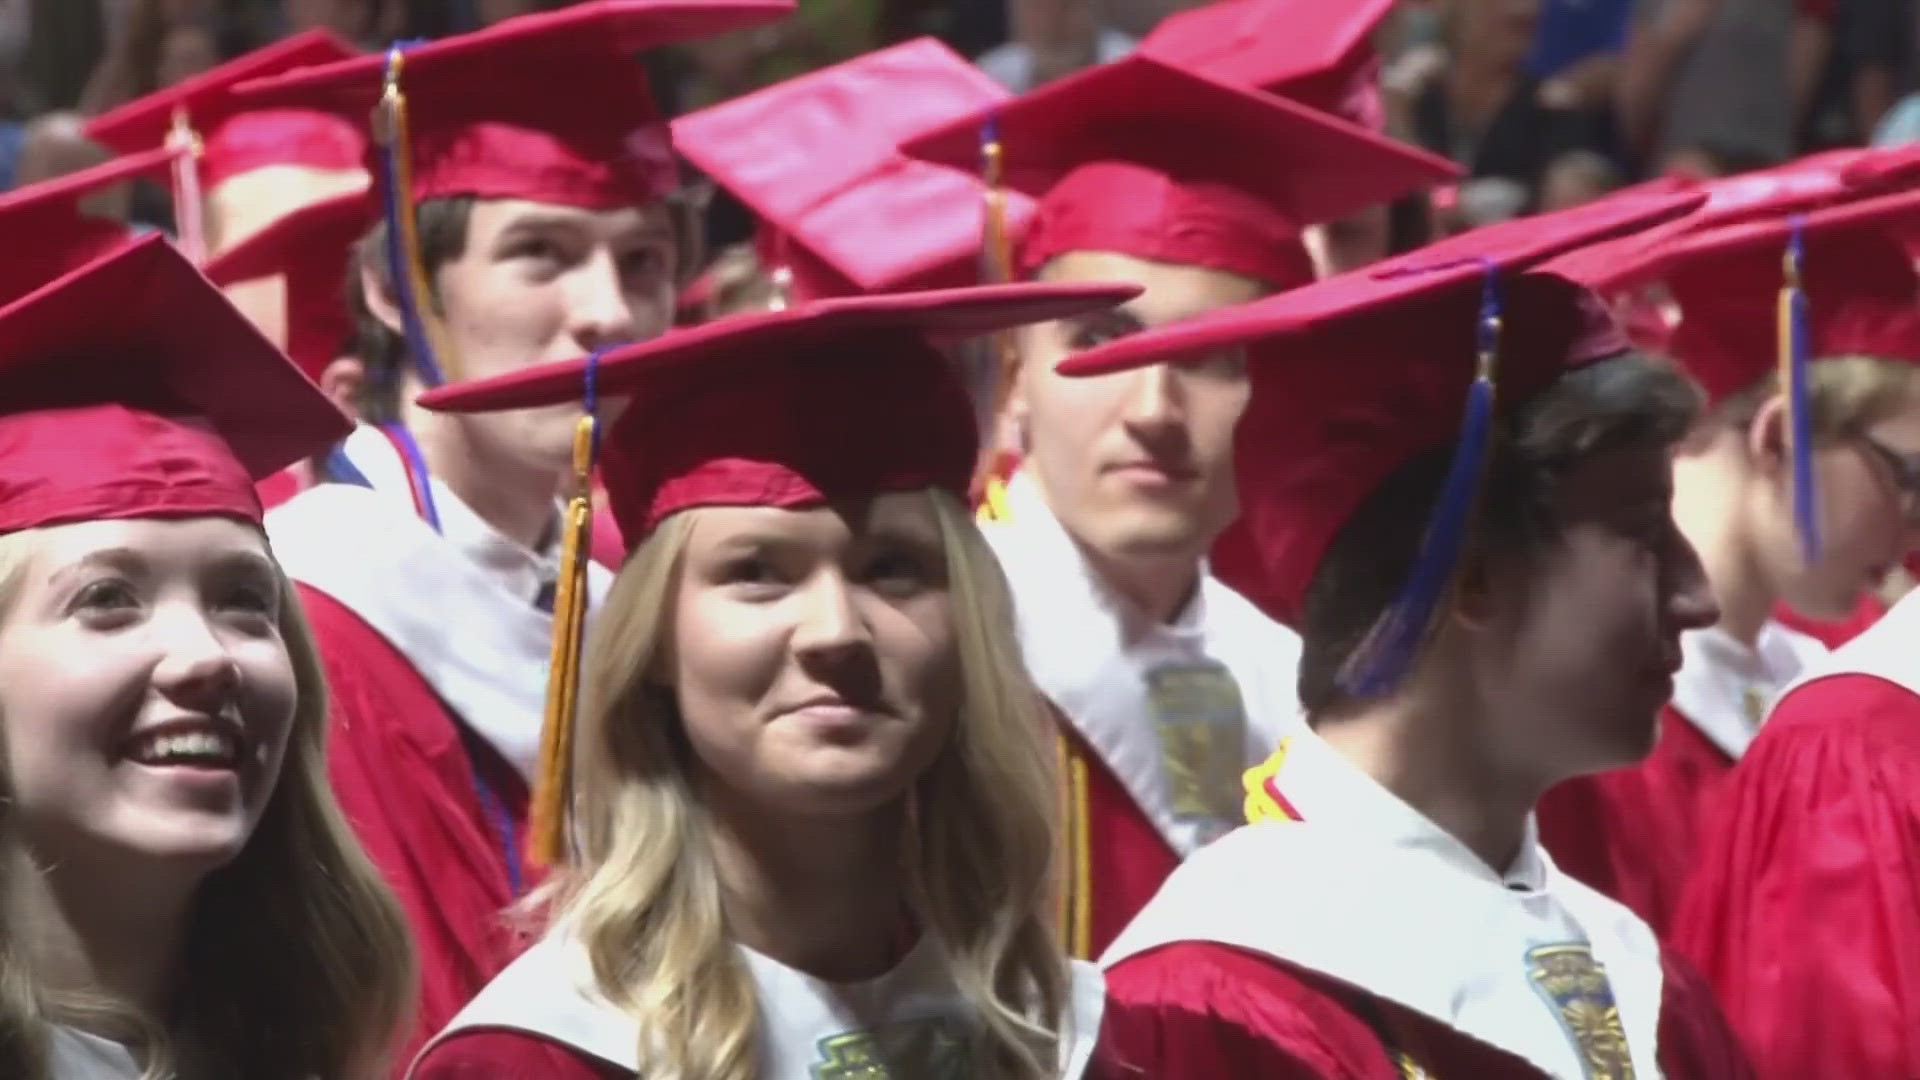 School leaders say they won't let students cross the stage unless they meet the dress code.